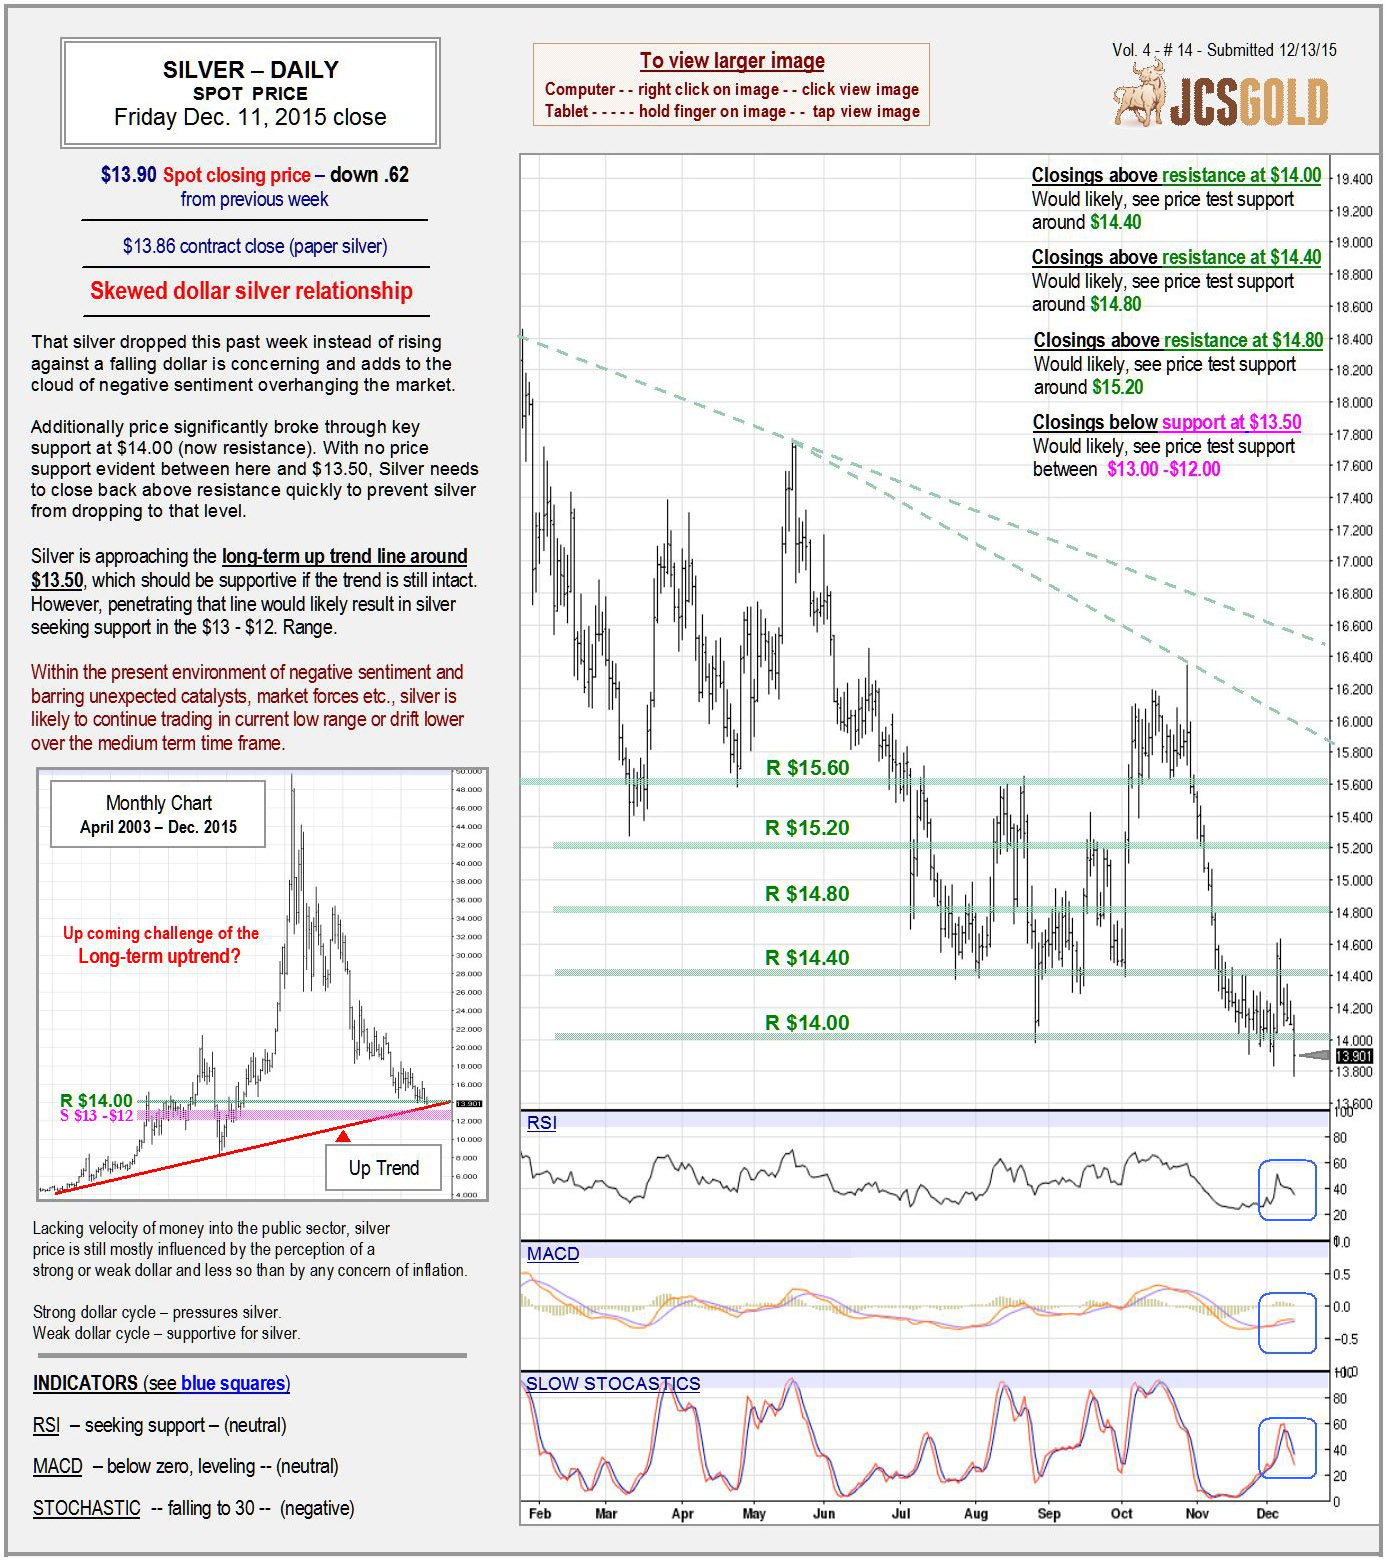 Dec 11, 2015 chart & commentary